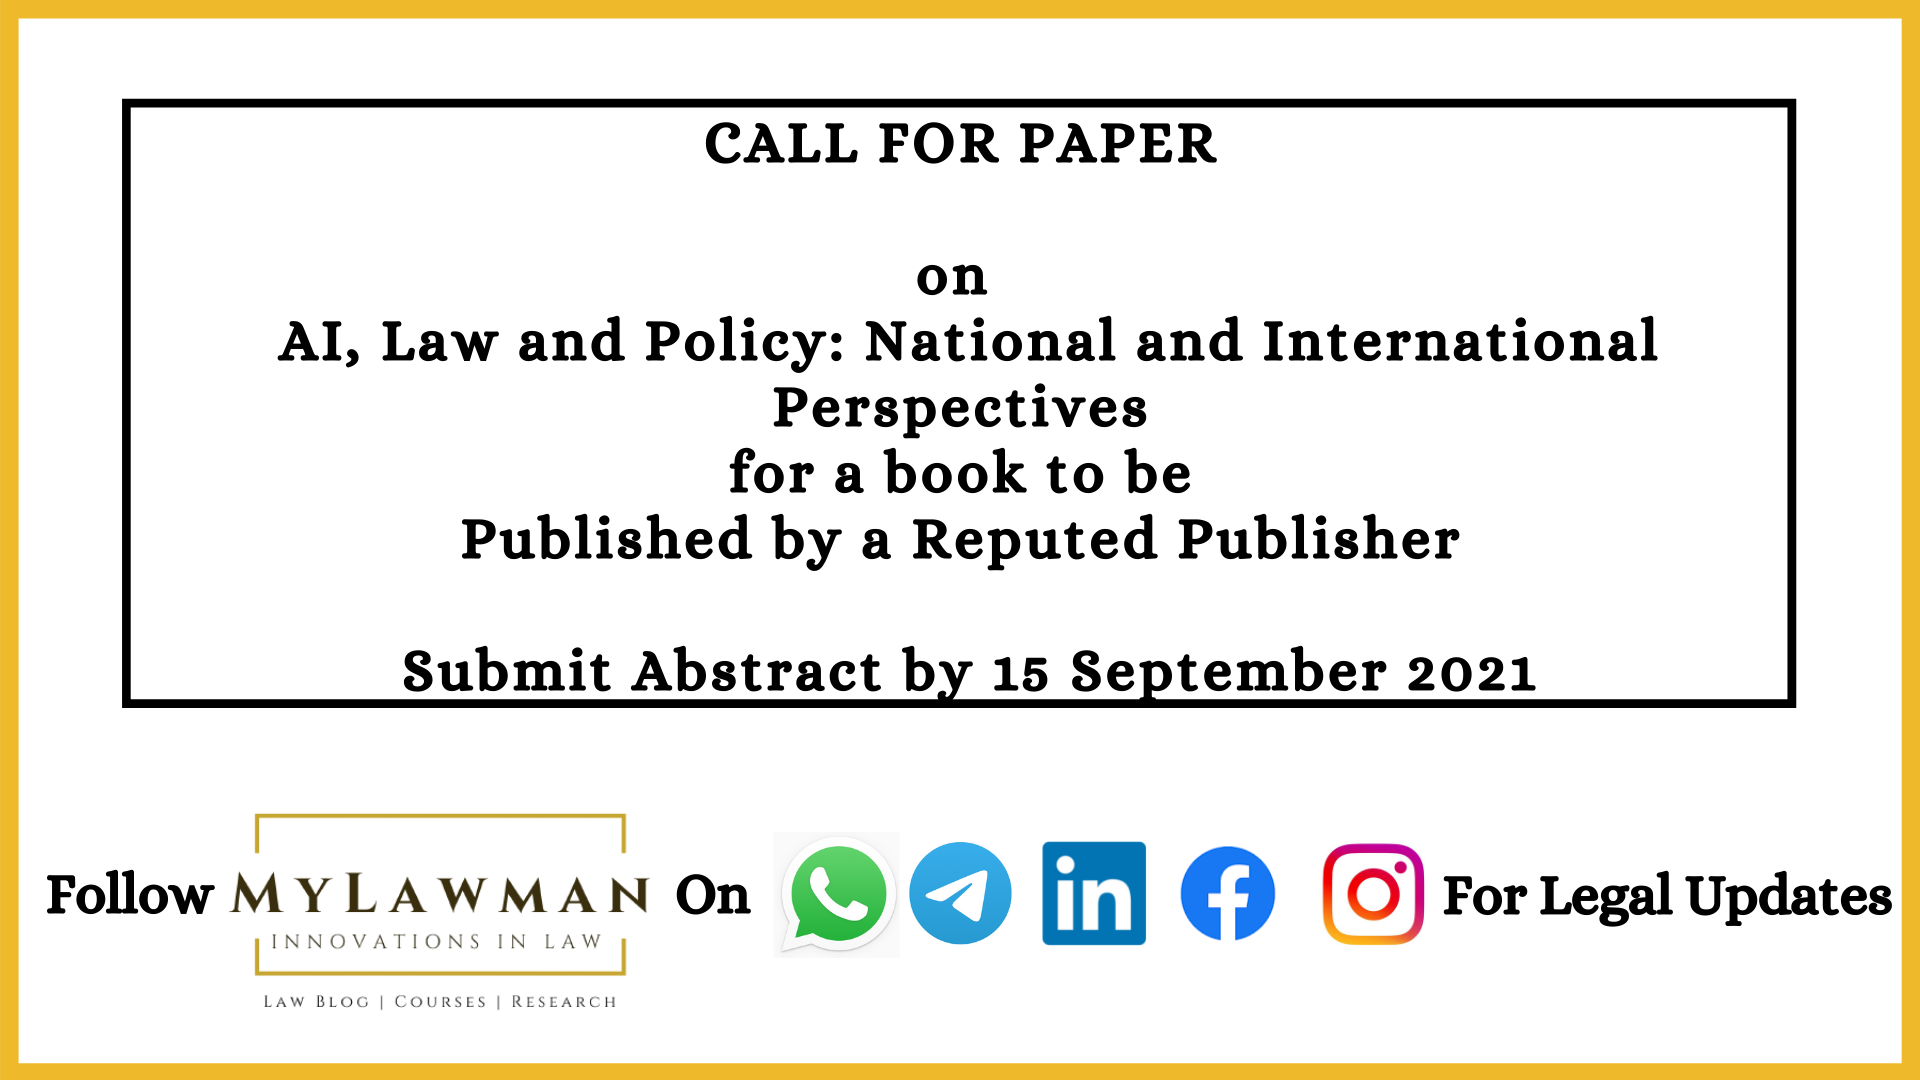 [Call for Papers] On AI, Law and Policy: National and International Perspectives for a book to be Published by a Reputed Publisher [Submit Abstract by 15 September 2021]